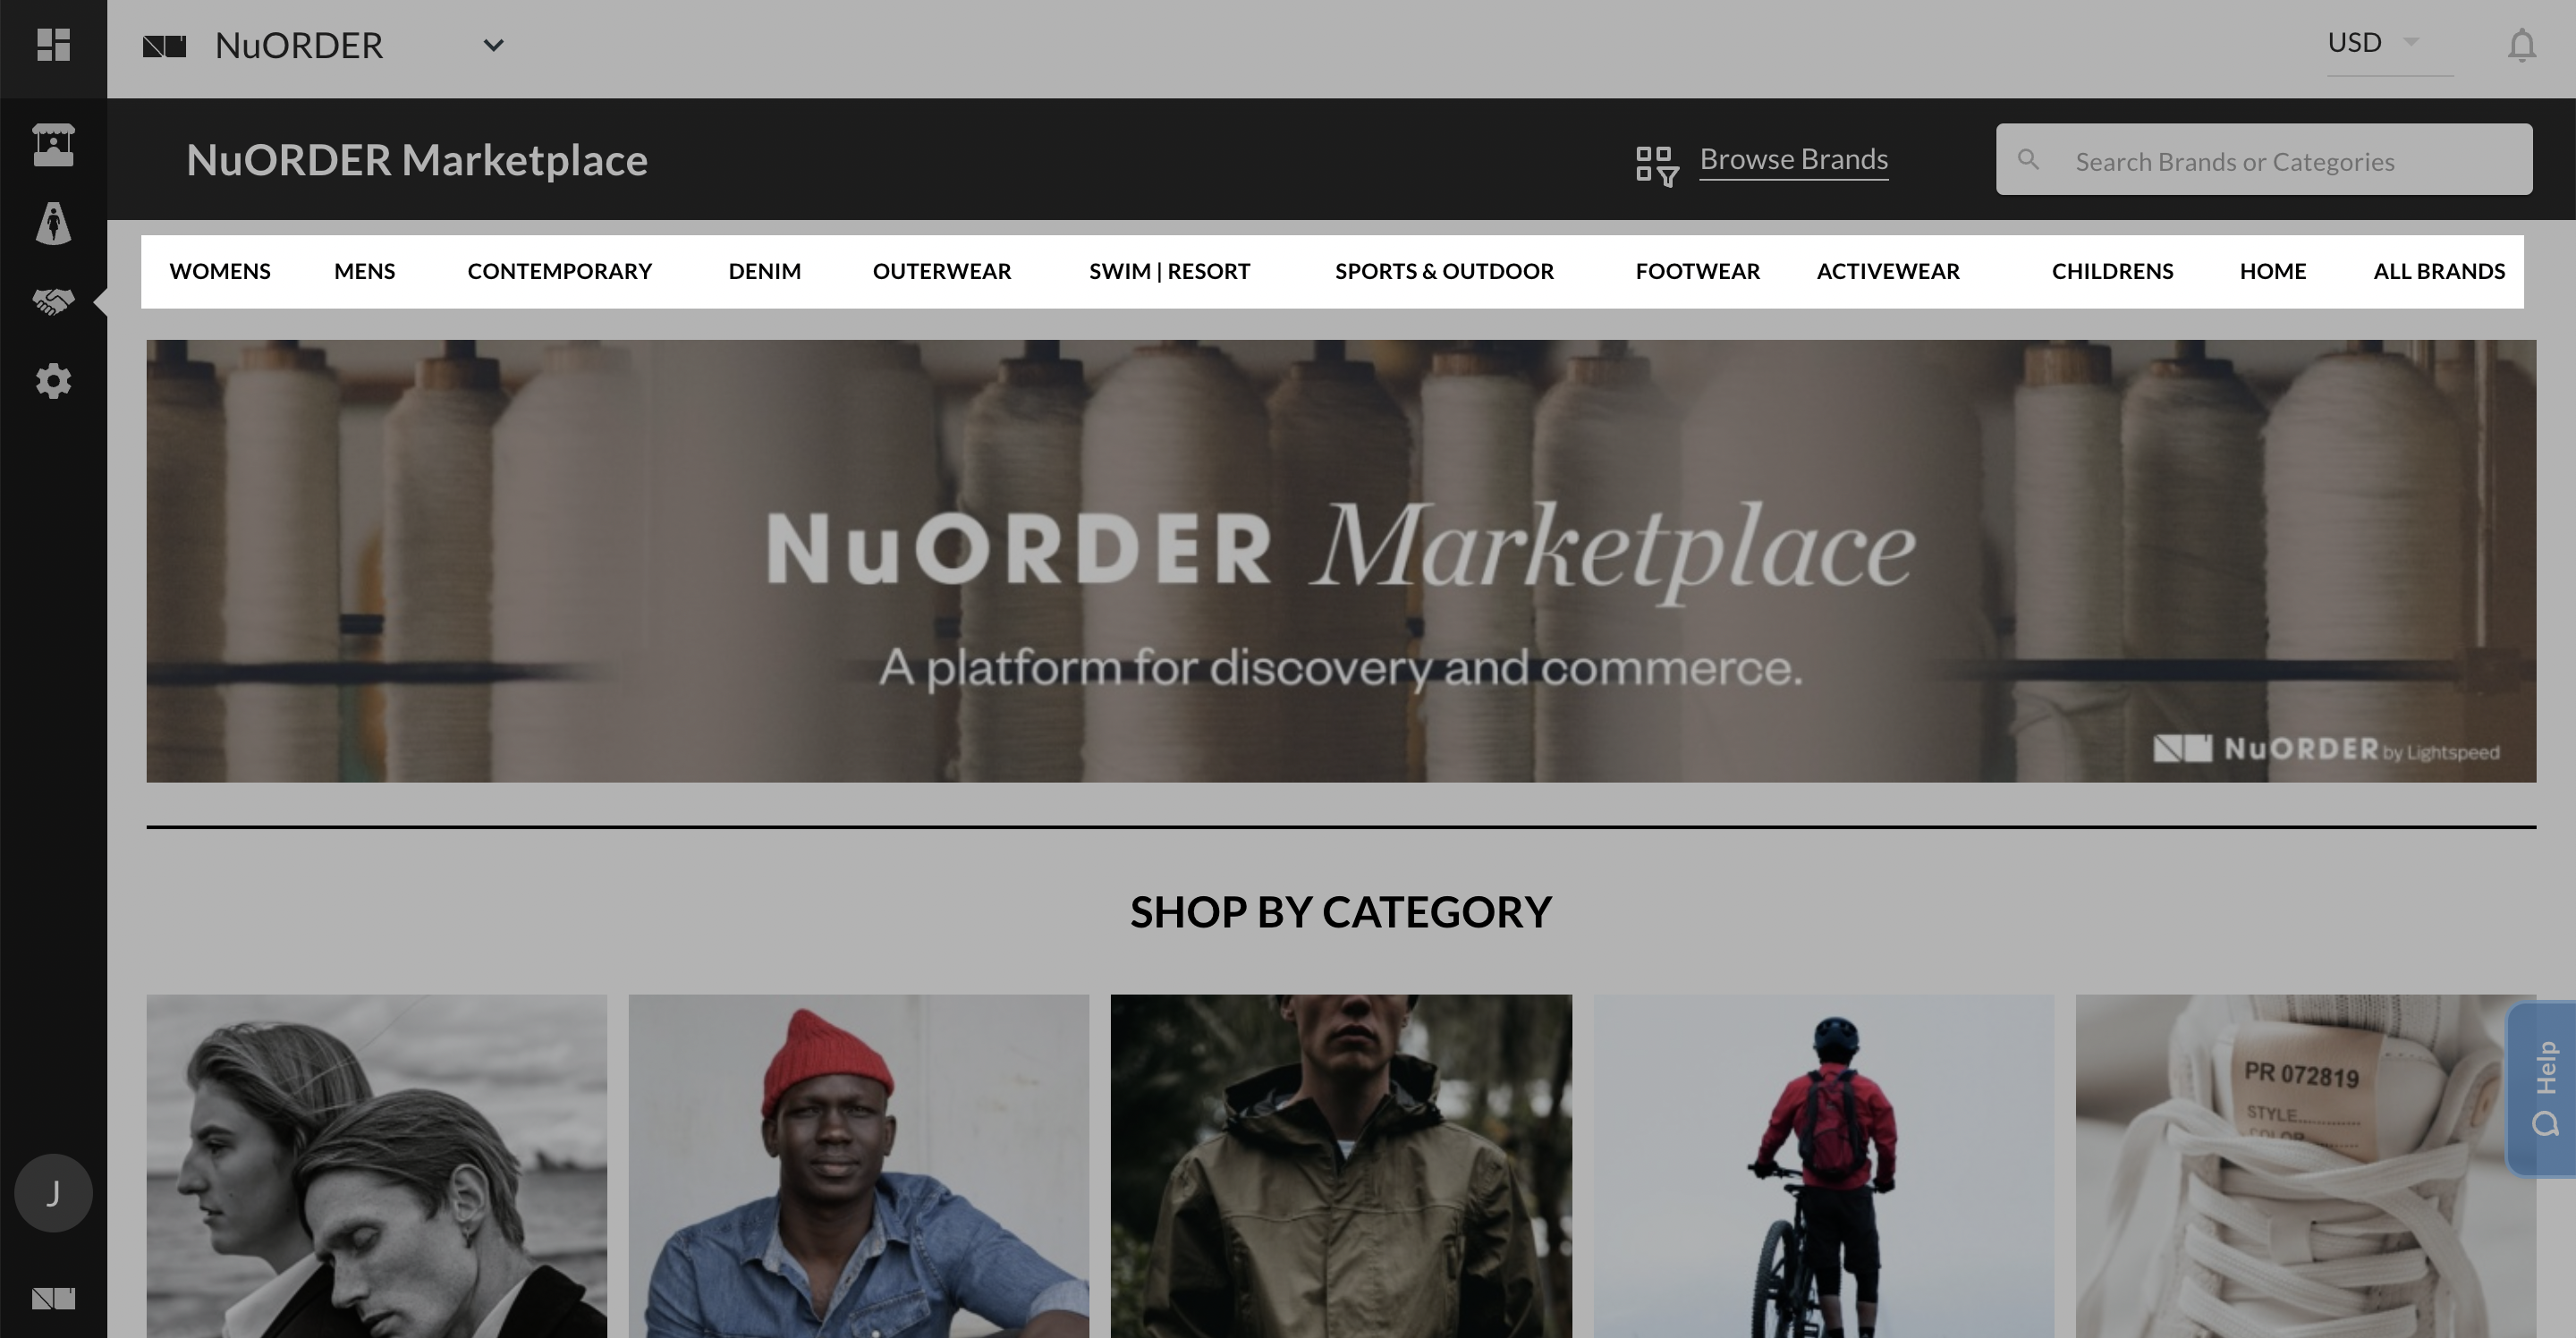 NuORDER-Marketplace-Category-Bar.png